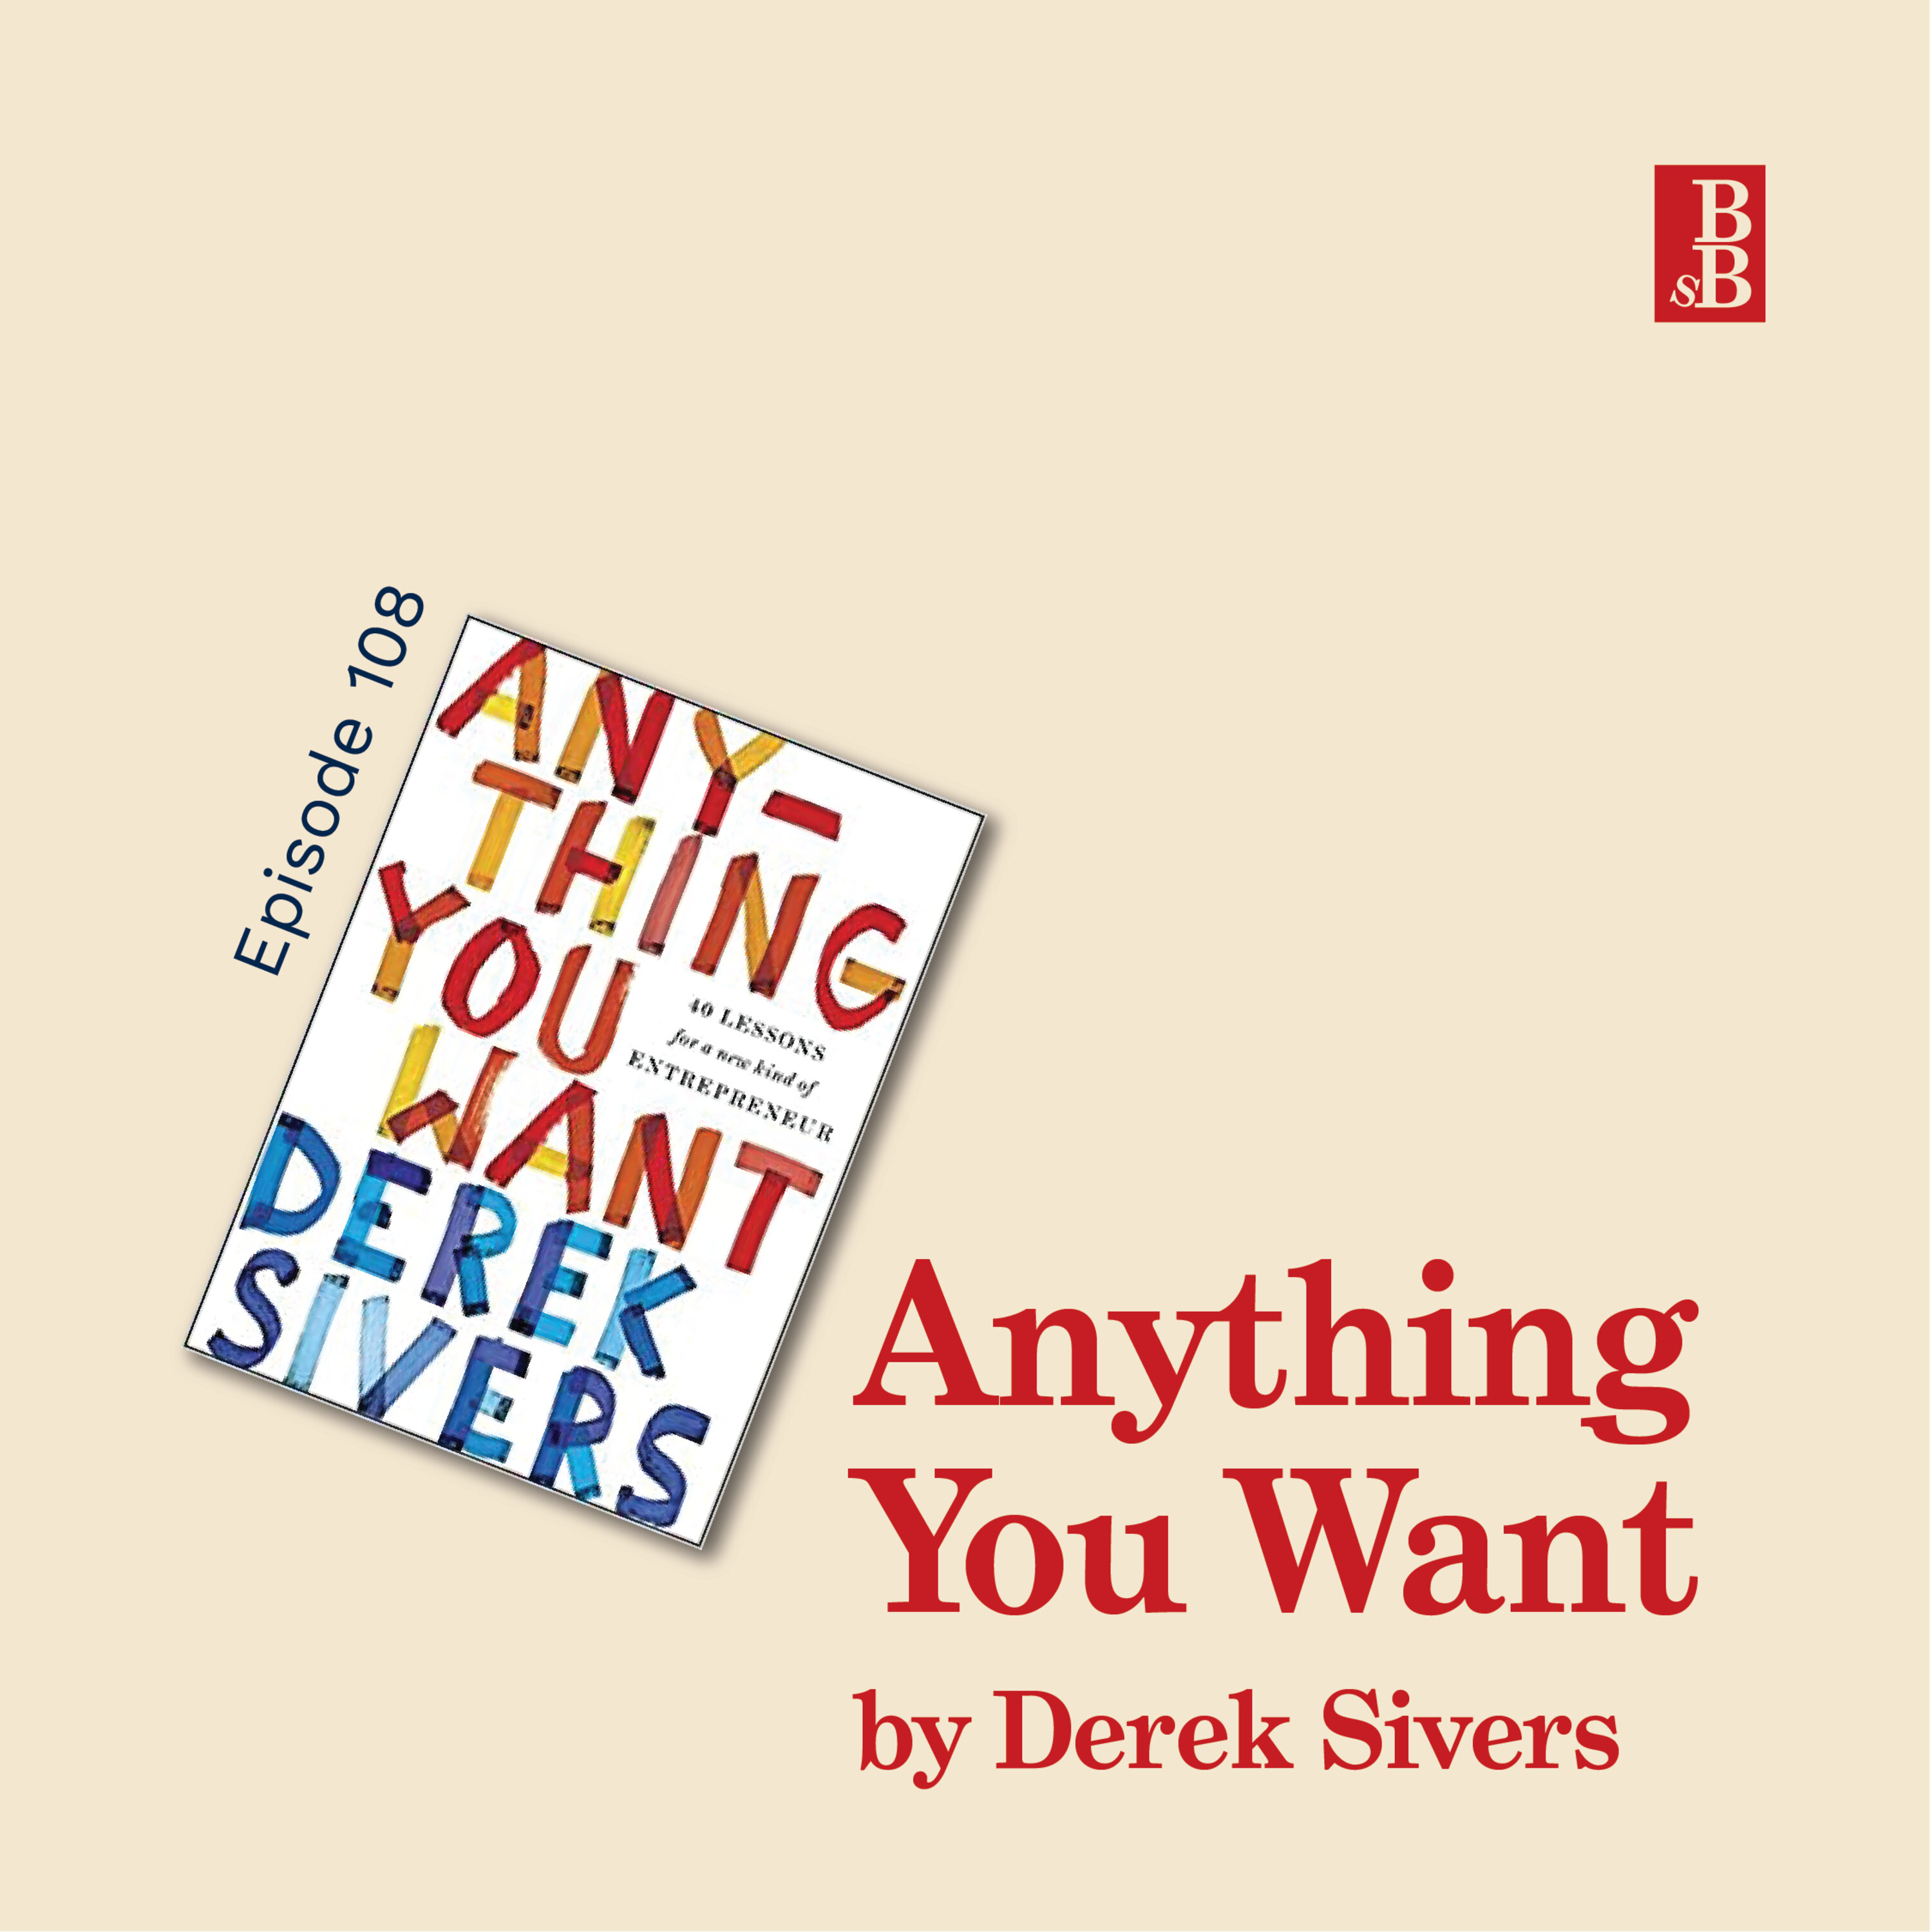 Anything You Want by Derek Sivers: the surprising way to grow a company by not focusing on growth